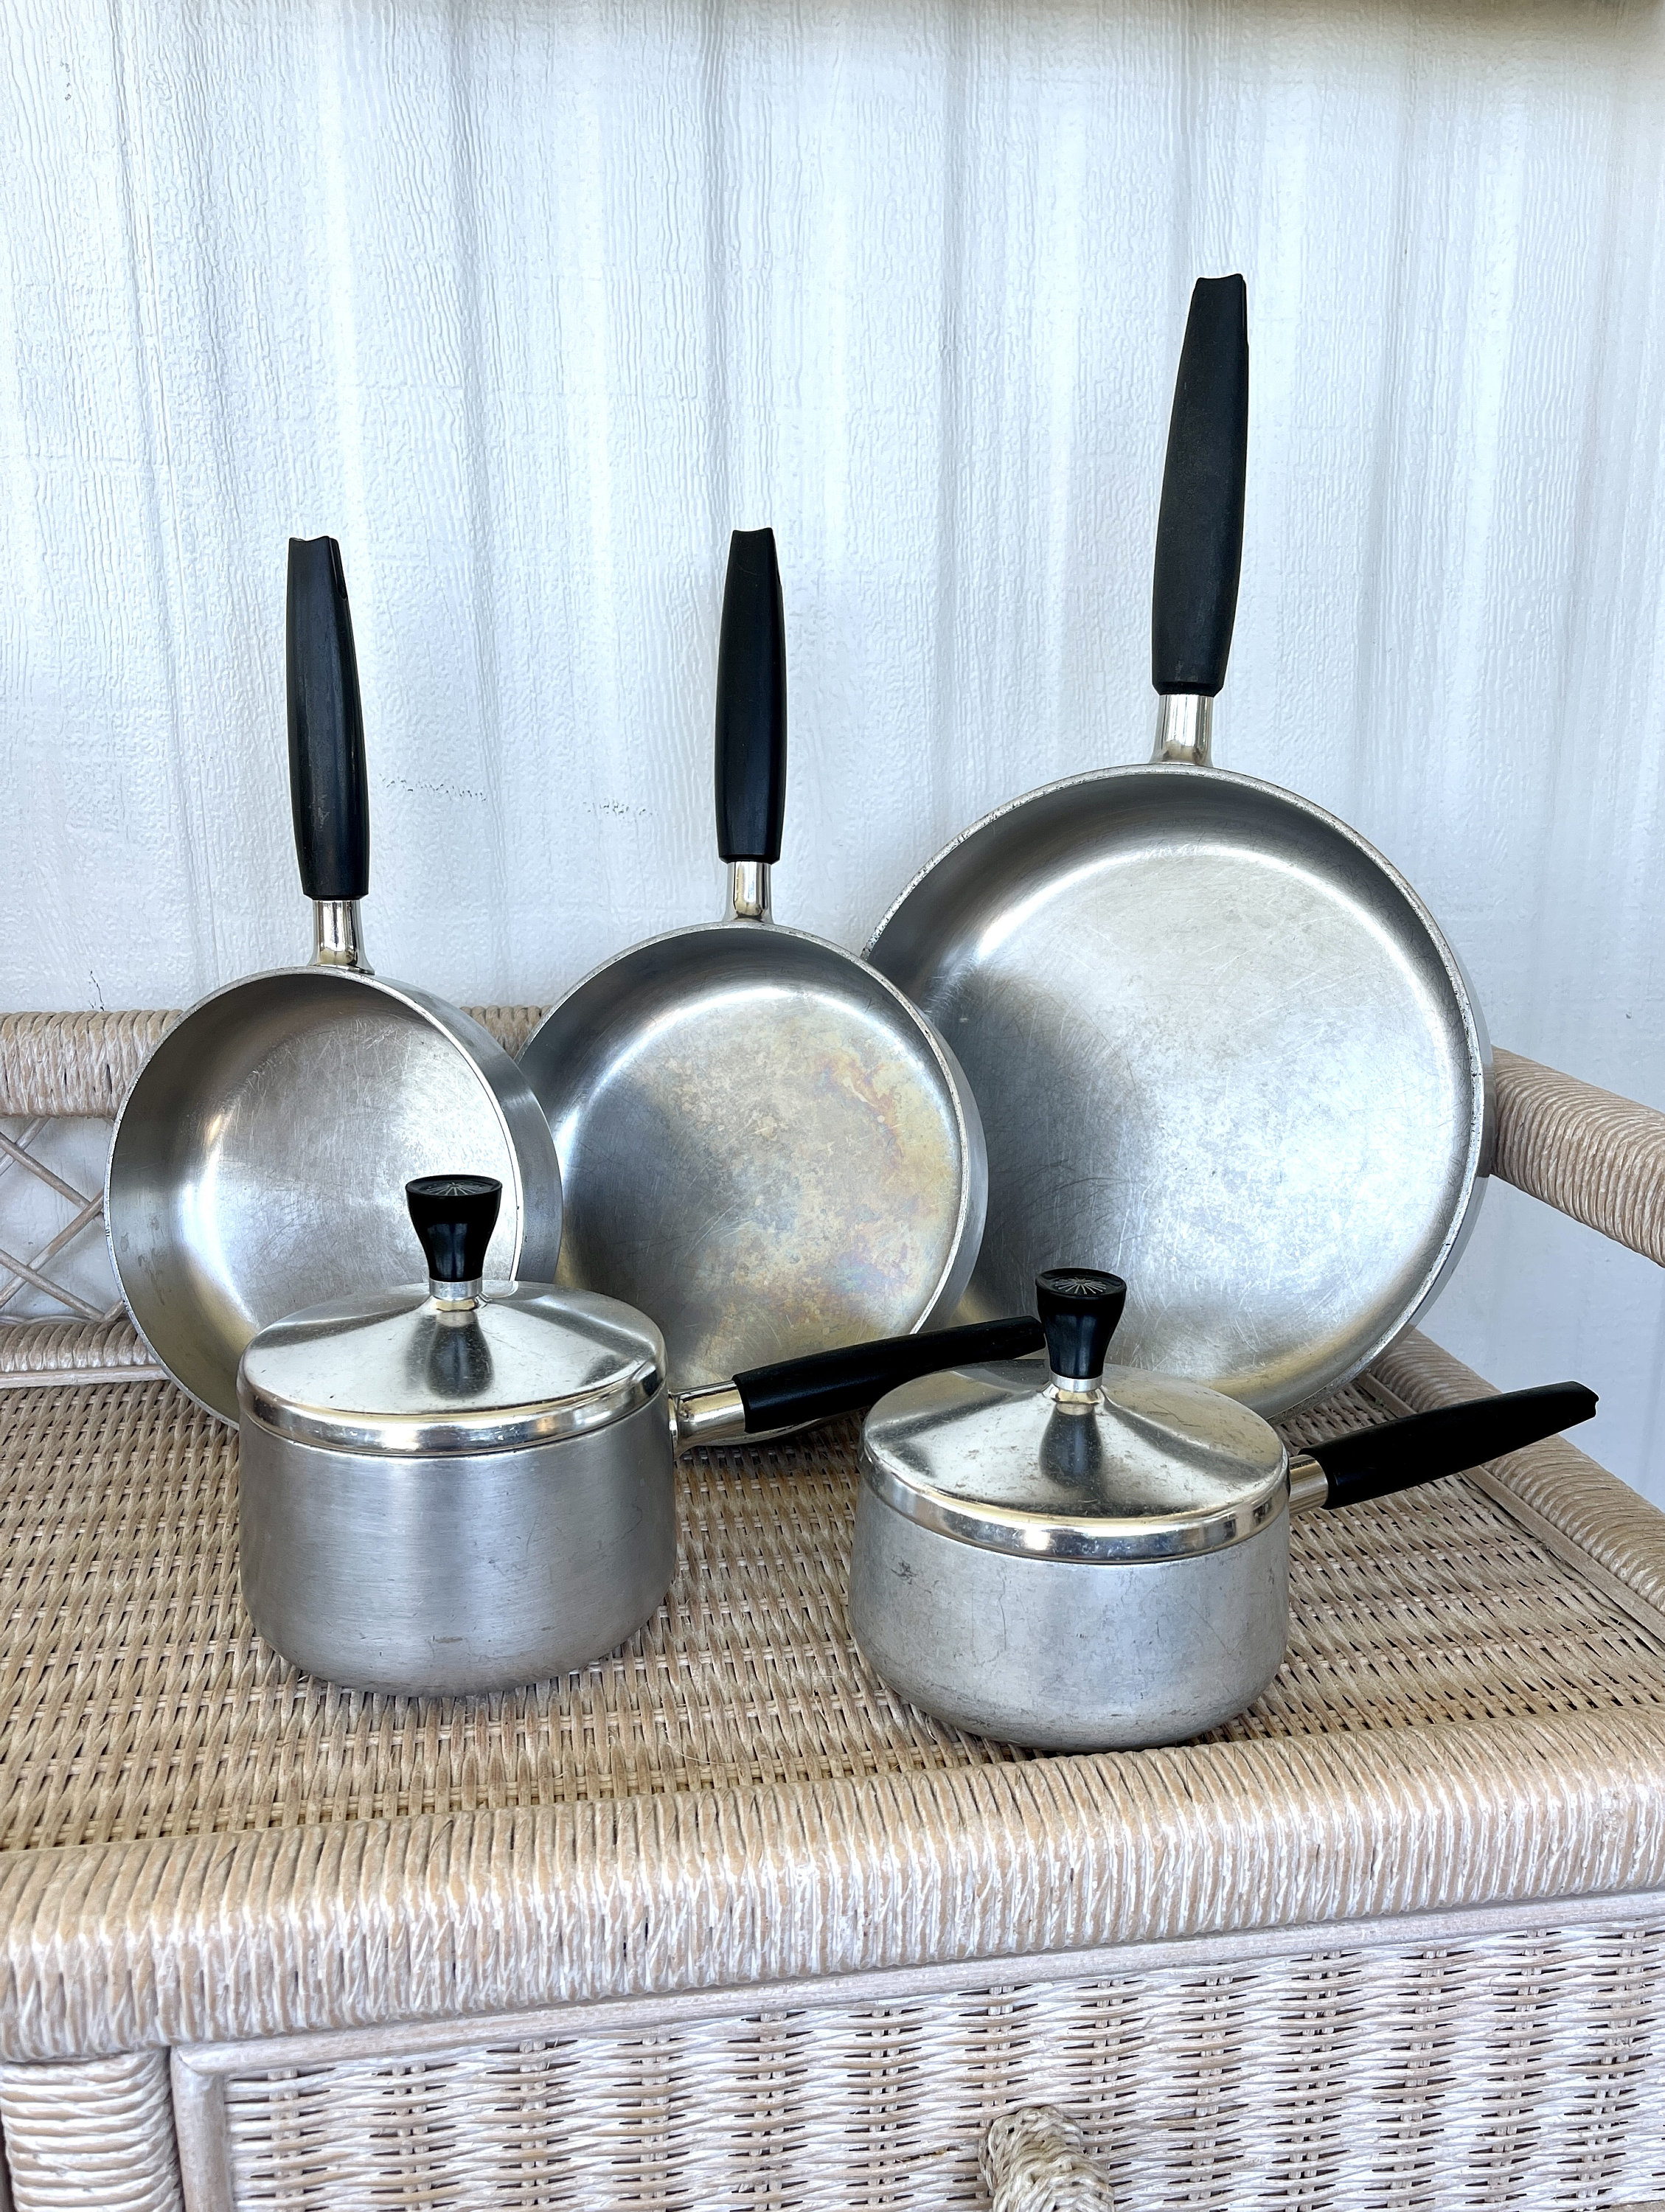 LET'S TALK ABOUT IT! Vintage Stainless Steel Pots-N-Pans - Brands